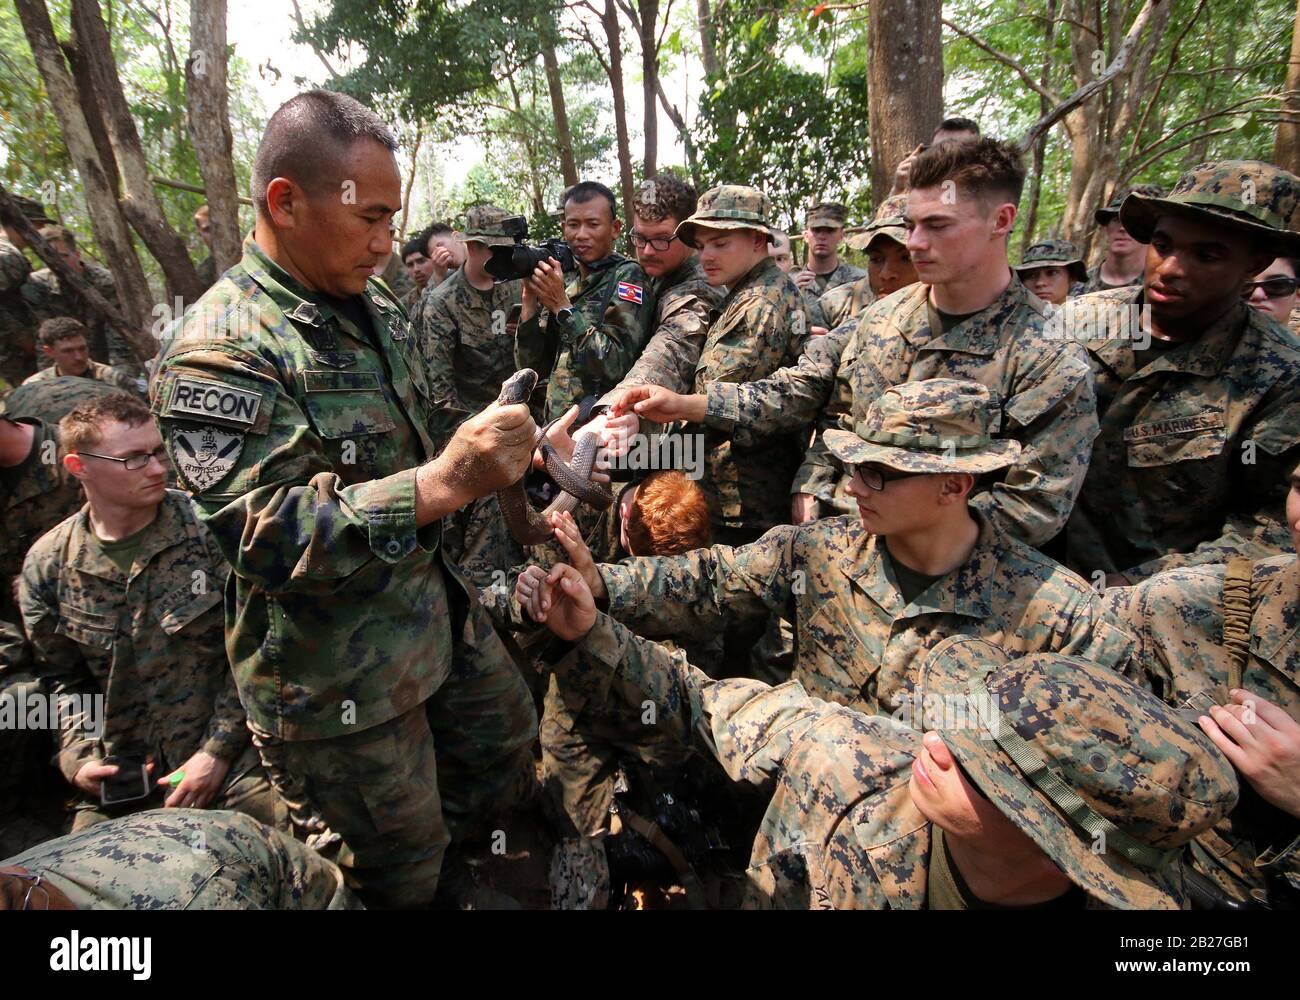 Chanthaburi, Thailand. 1st Mar, 2020. US Marines take a jungle survival training as part of the military exercise Cobra Gold 2020 at a Navy base in Chanthaburi province. March 01, 2020. The 39th annual Cobra Gold military exercise is an event held between the Thai and US armed forces every year. It's the largest Asia-Pacific military exercise held each year, and is among the largest multinational military exercises in which the US participates. Credit: Urdee Image/ZUMA Wire/Alamy Live News Stock Photo